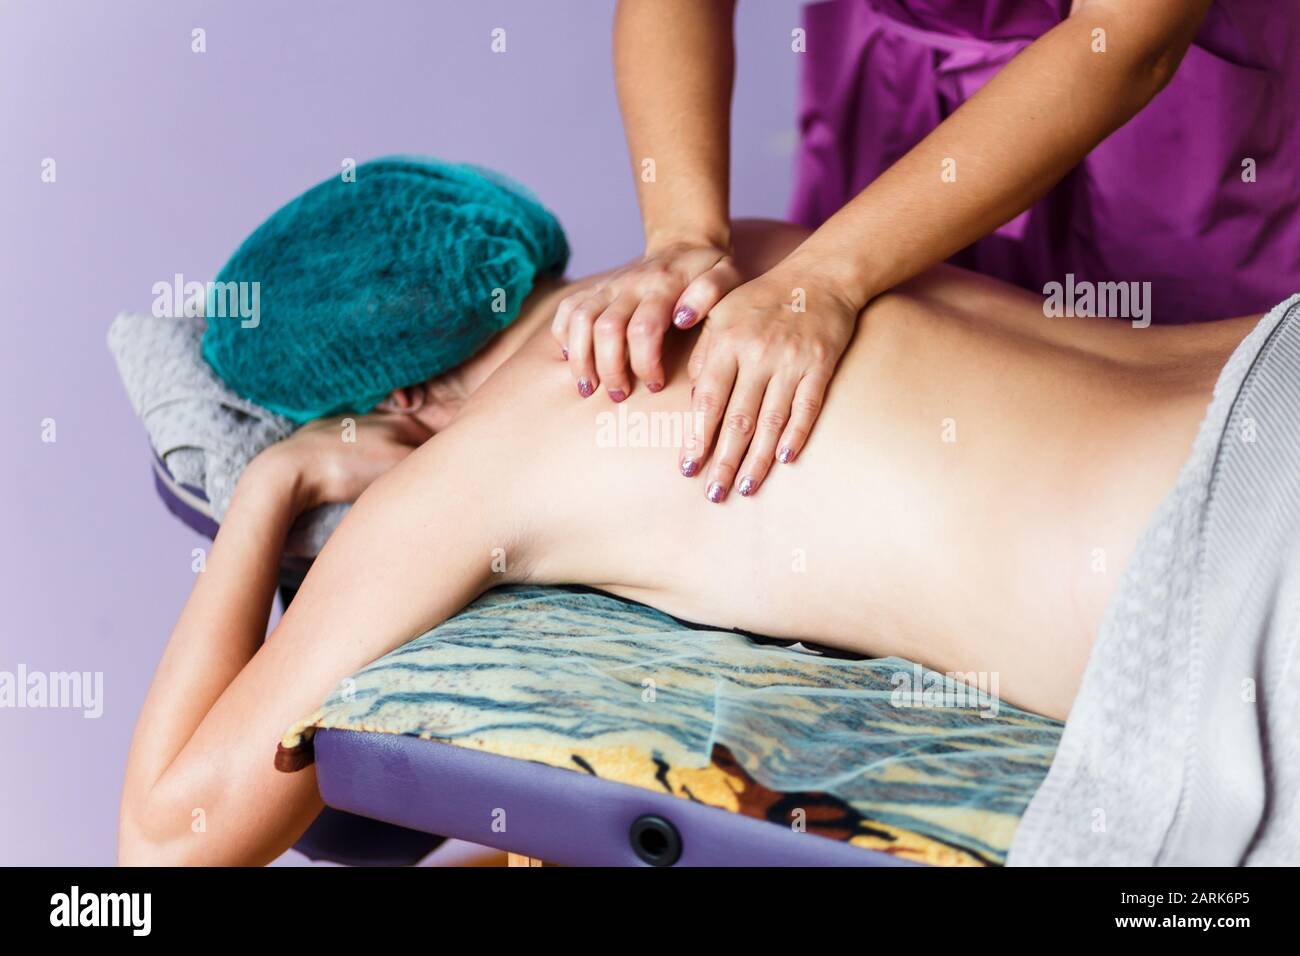 Professional massage therapist is kneading back of client by her hands Stock Photo